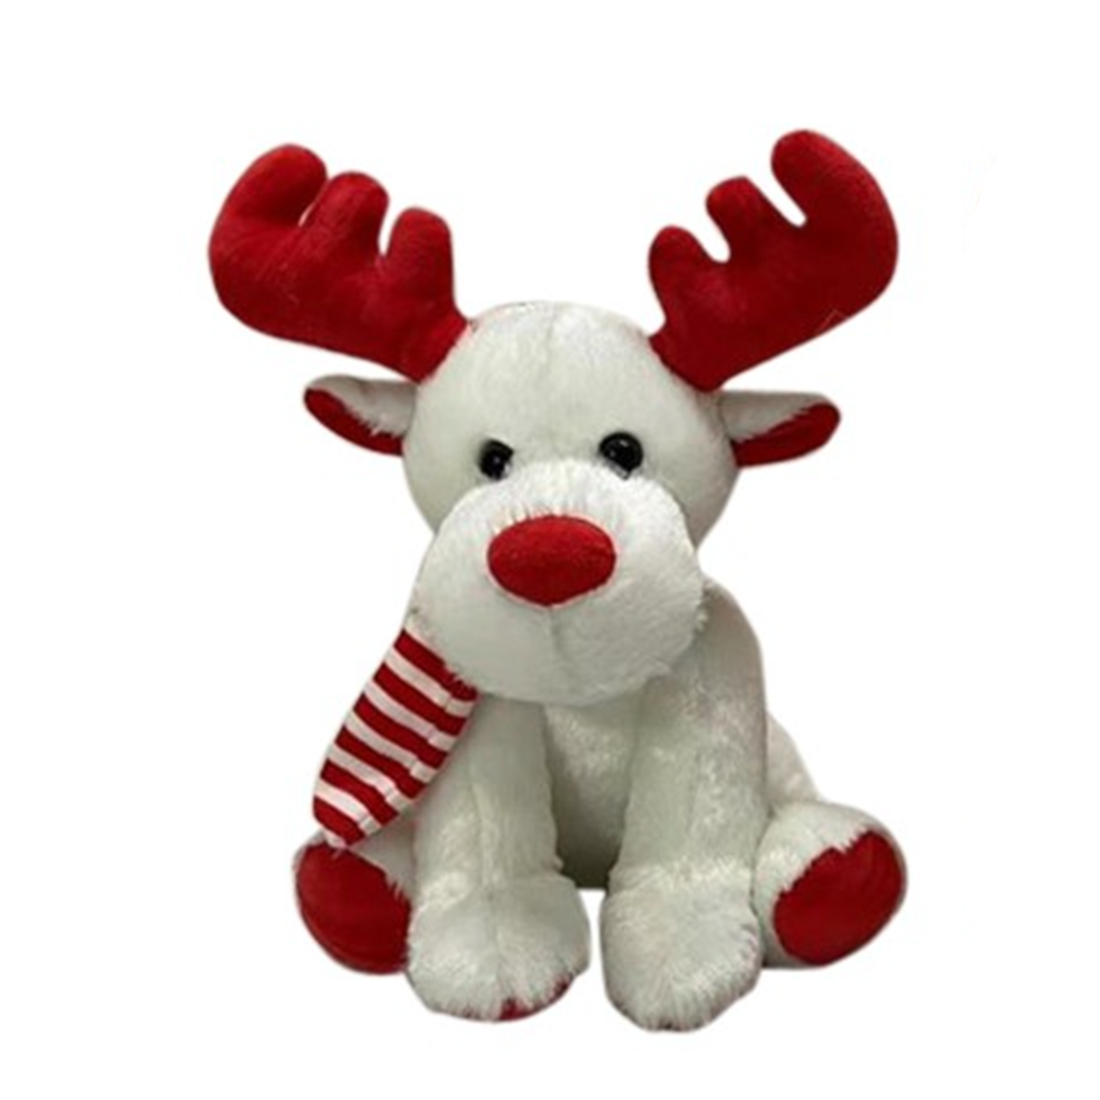 23cm Sitting Plush Reindeer with Red Antlers